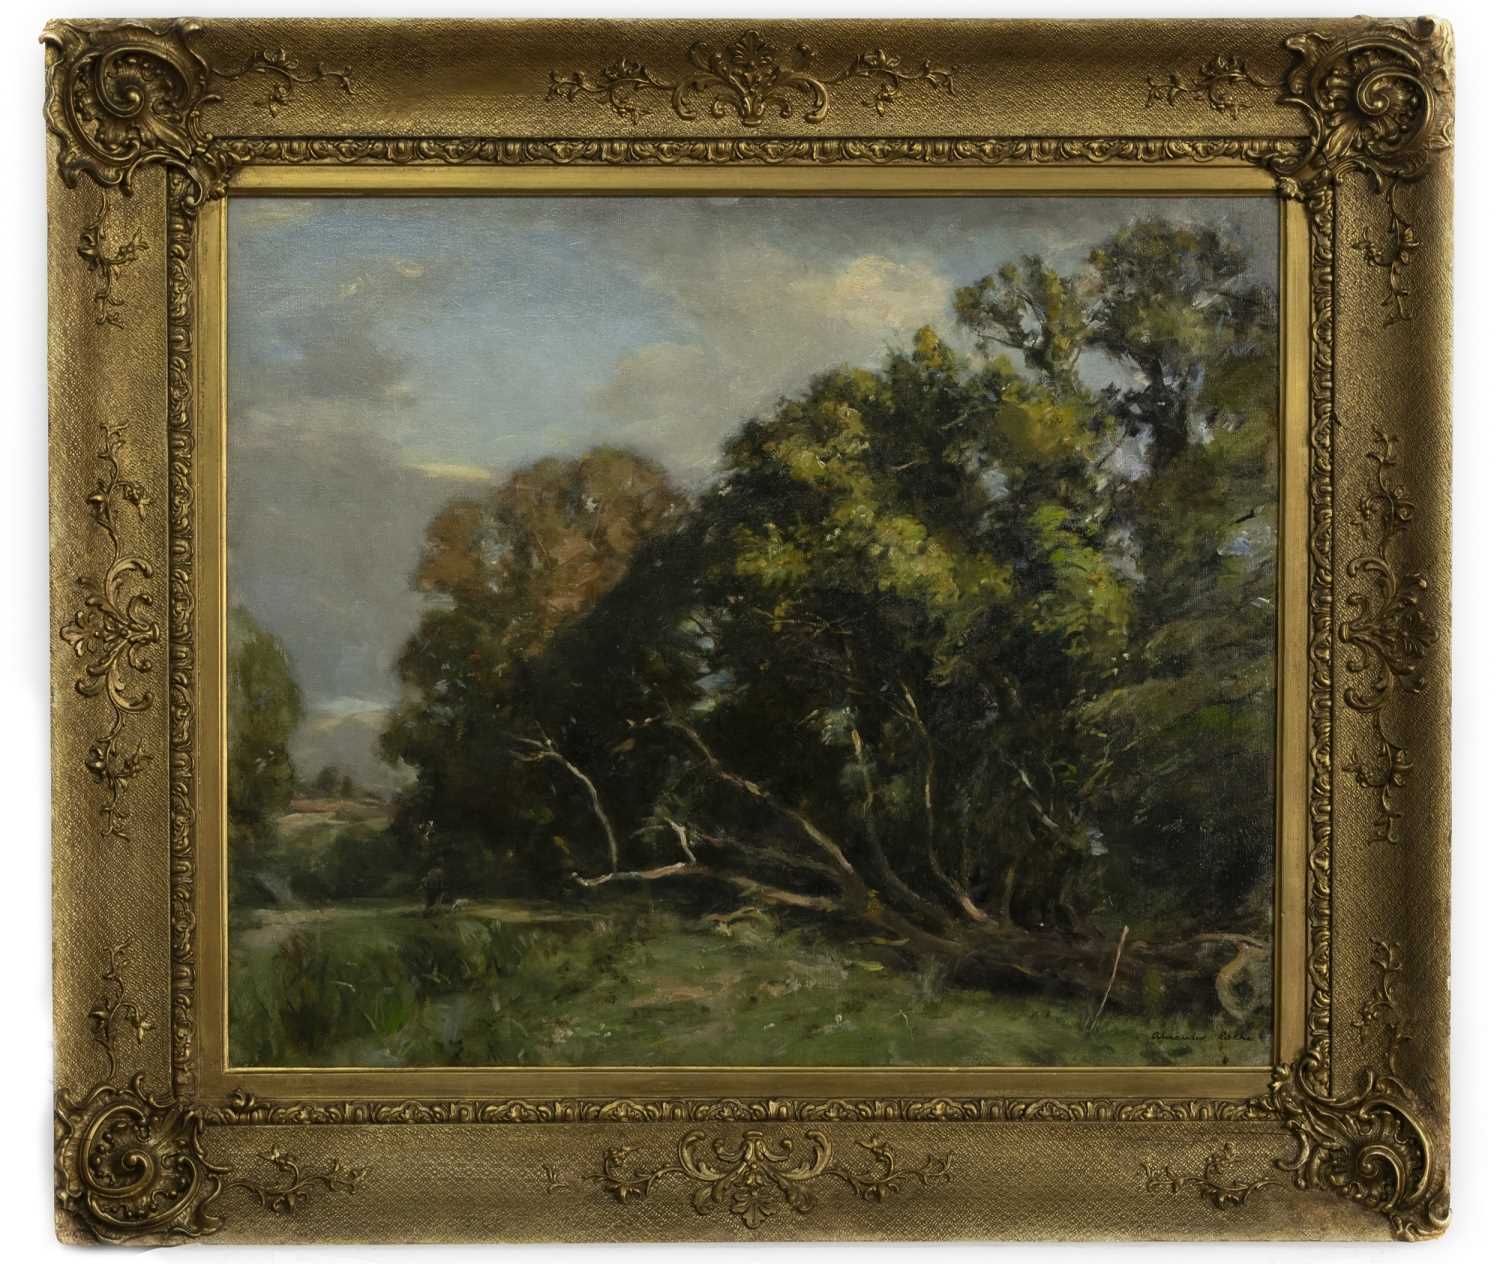 Lot 180 - THE WALK TO THE RIVER, AN OIL BY ALEXANDER IGNATIUS ROCHE